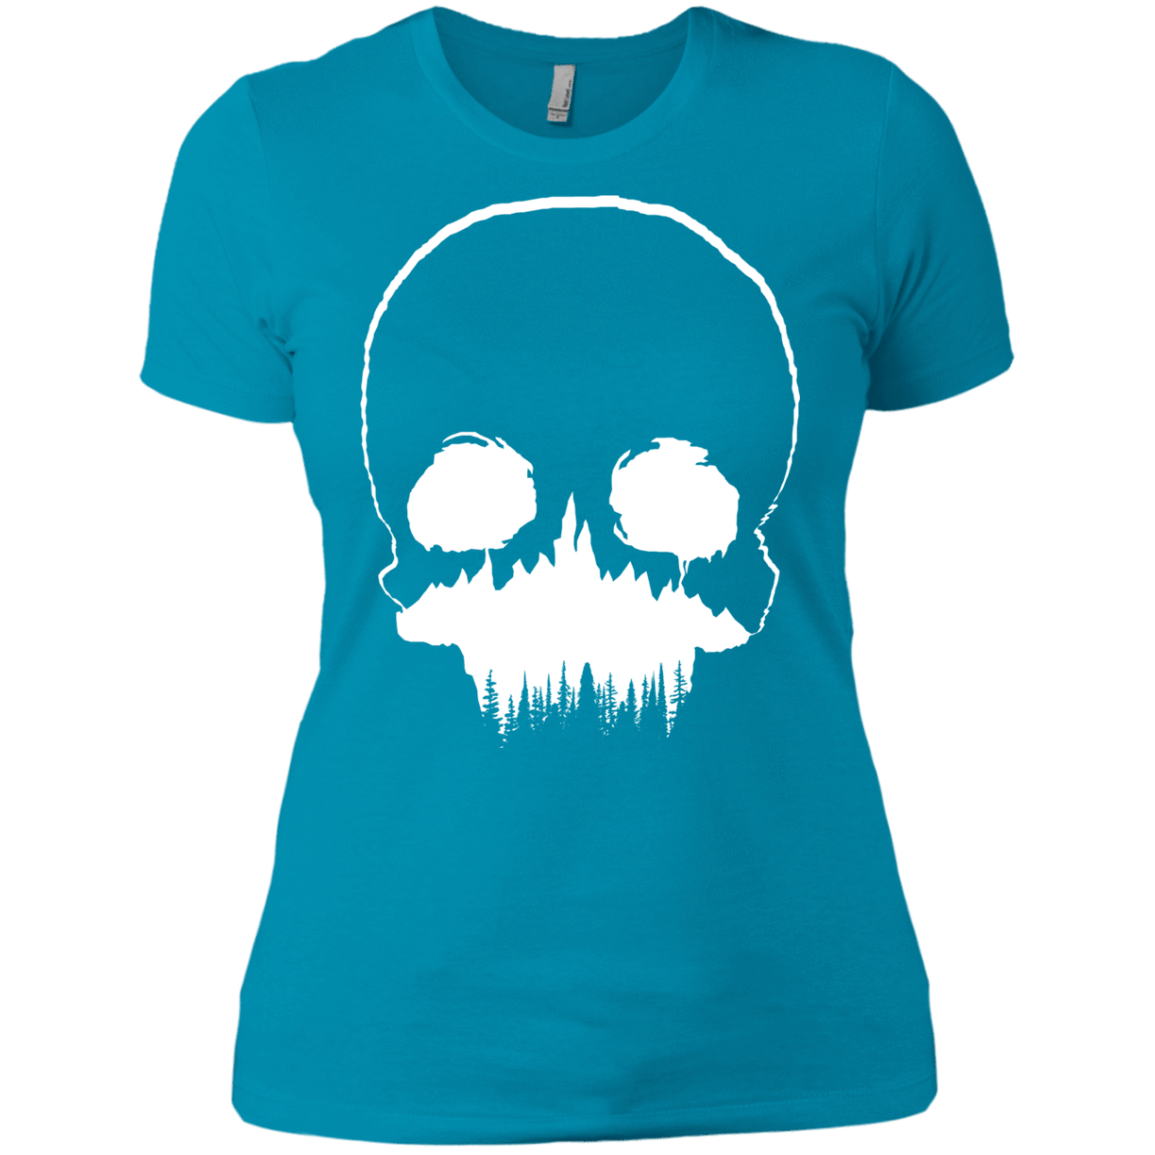 T-Shirts Turquoise / X-Small Skull Forest Women's Premium T-Shirt